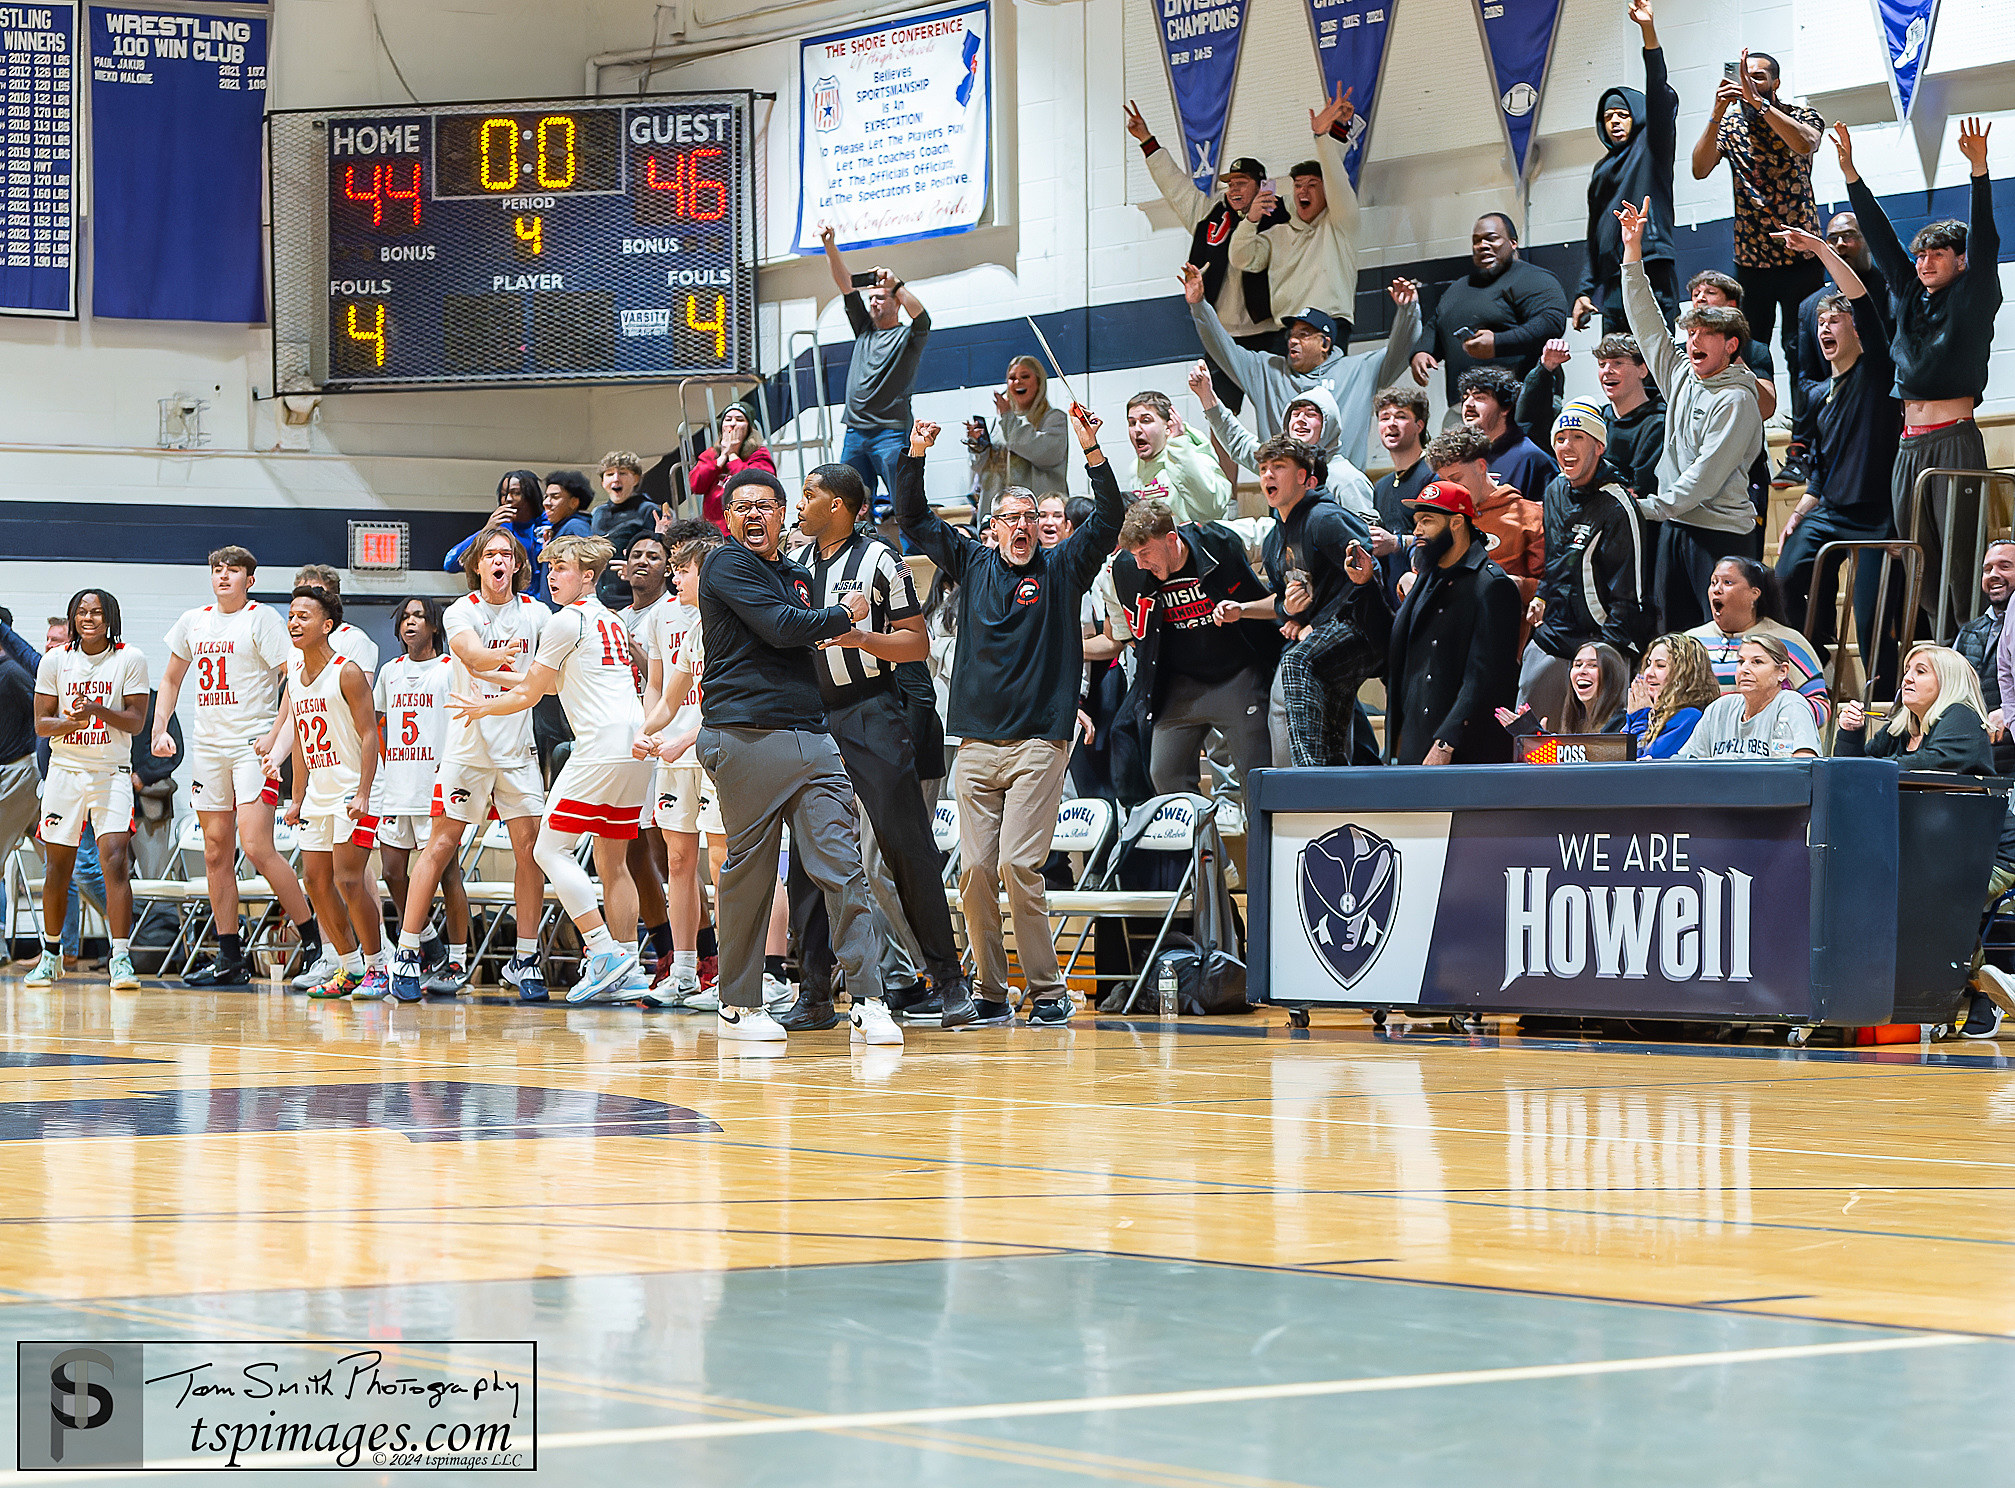 Jackson Memorial coach Randy Holmes and his team react to Brady Adams's winning shot as time expired in Wednesday's NJSIAA Central Group IV first-round game at Howell. (Photo: Tom Smith | tspsportsimages.com)